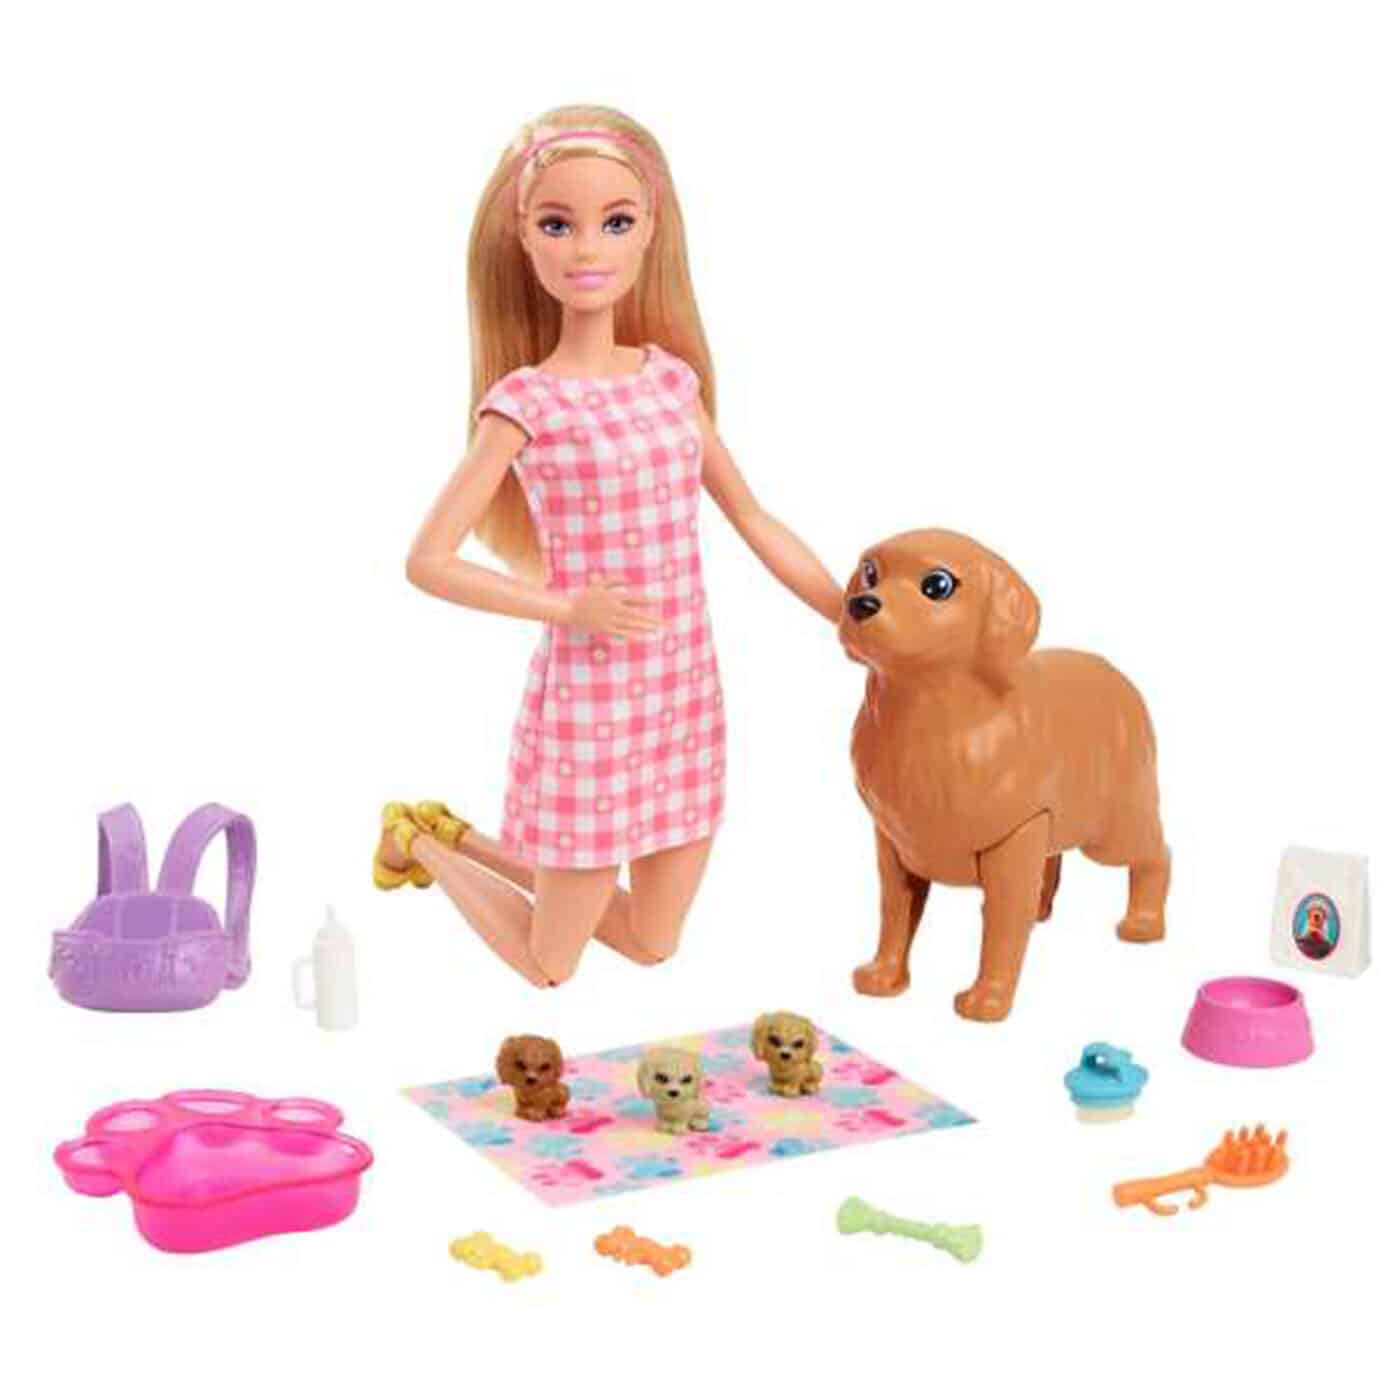 Barbie - Barbie Doll And Pets - Blond